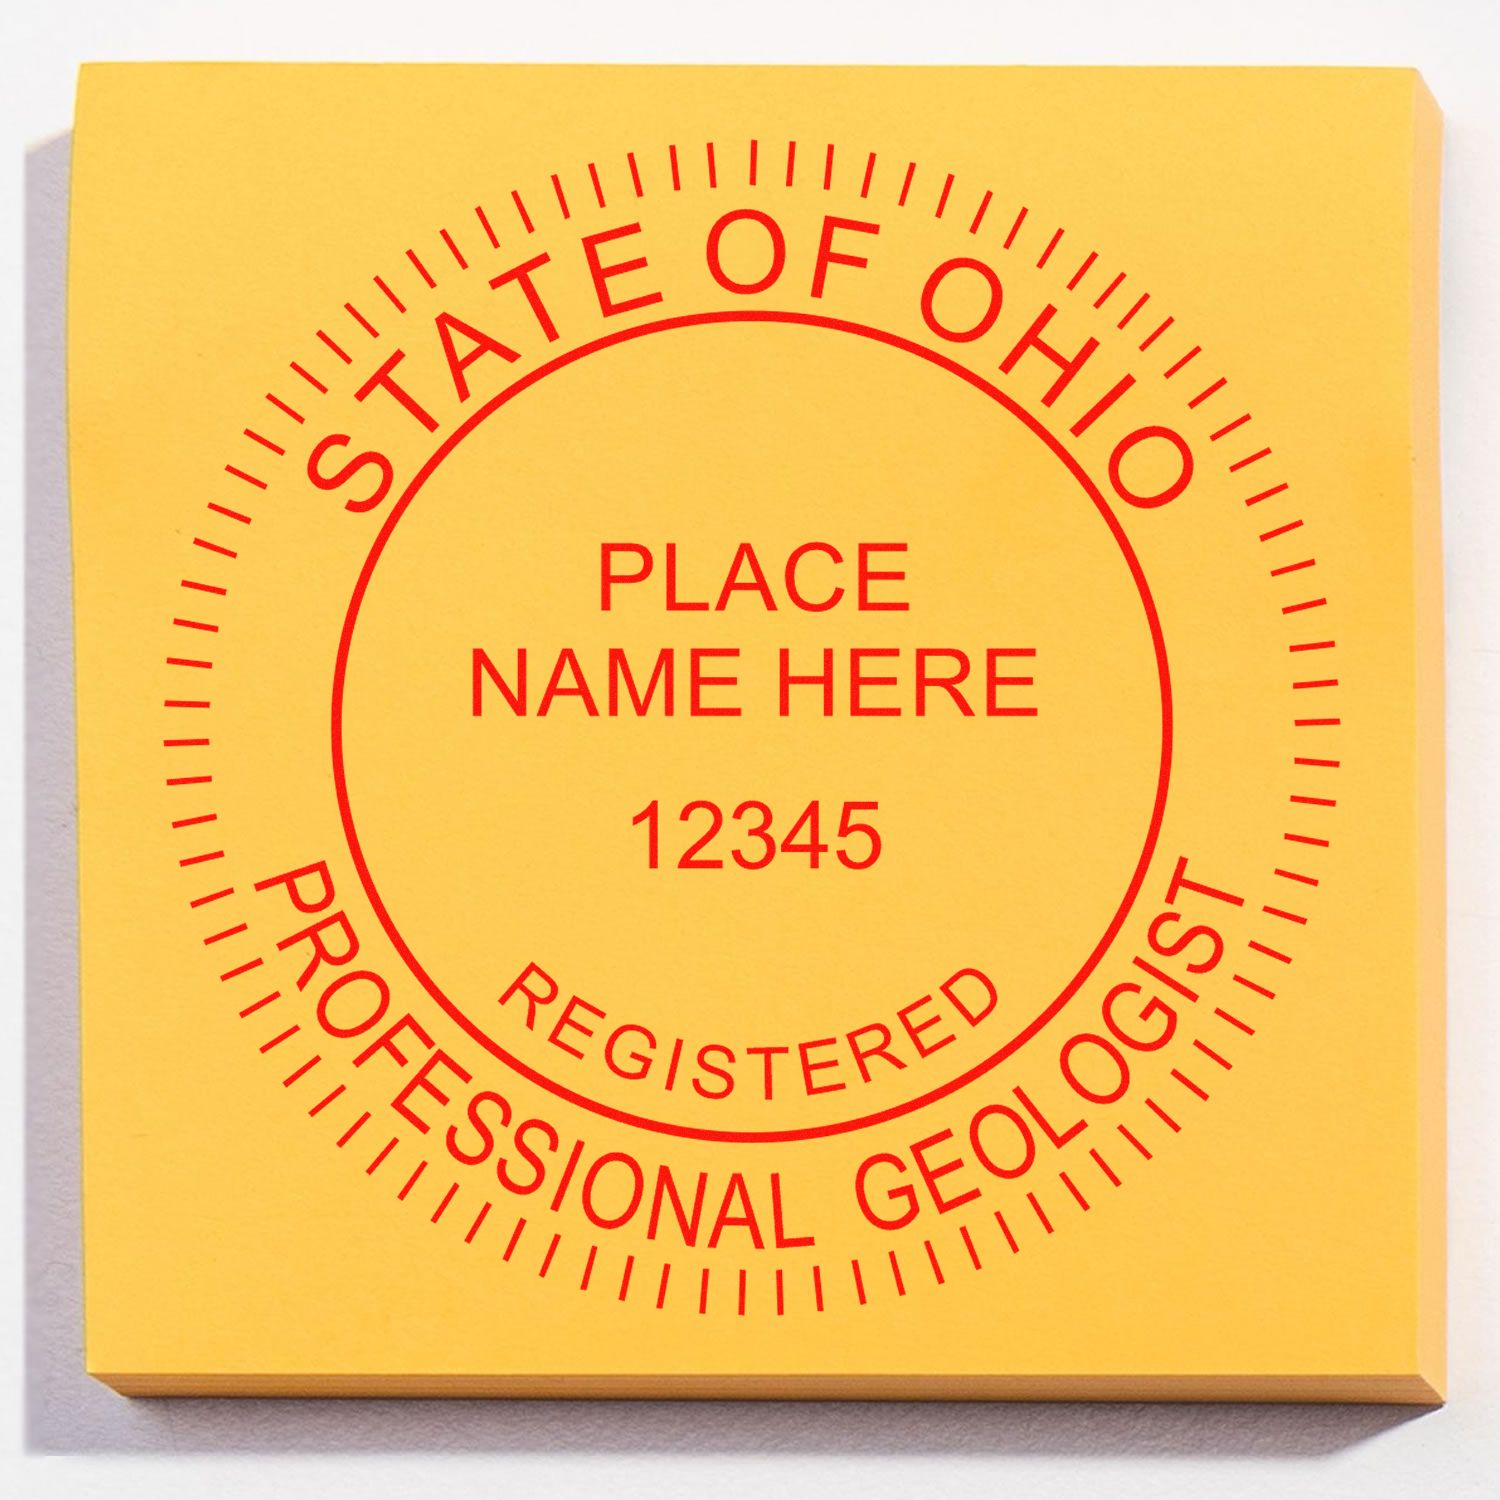 The Premium MaxLight Pre-Inked Ohio Geology Stamp stamp impression comes to life with a crisp, detailed image stamped on paper - showcasing true professional quality.